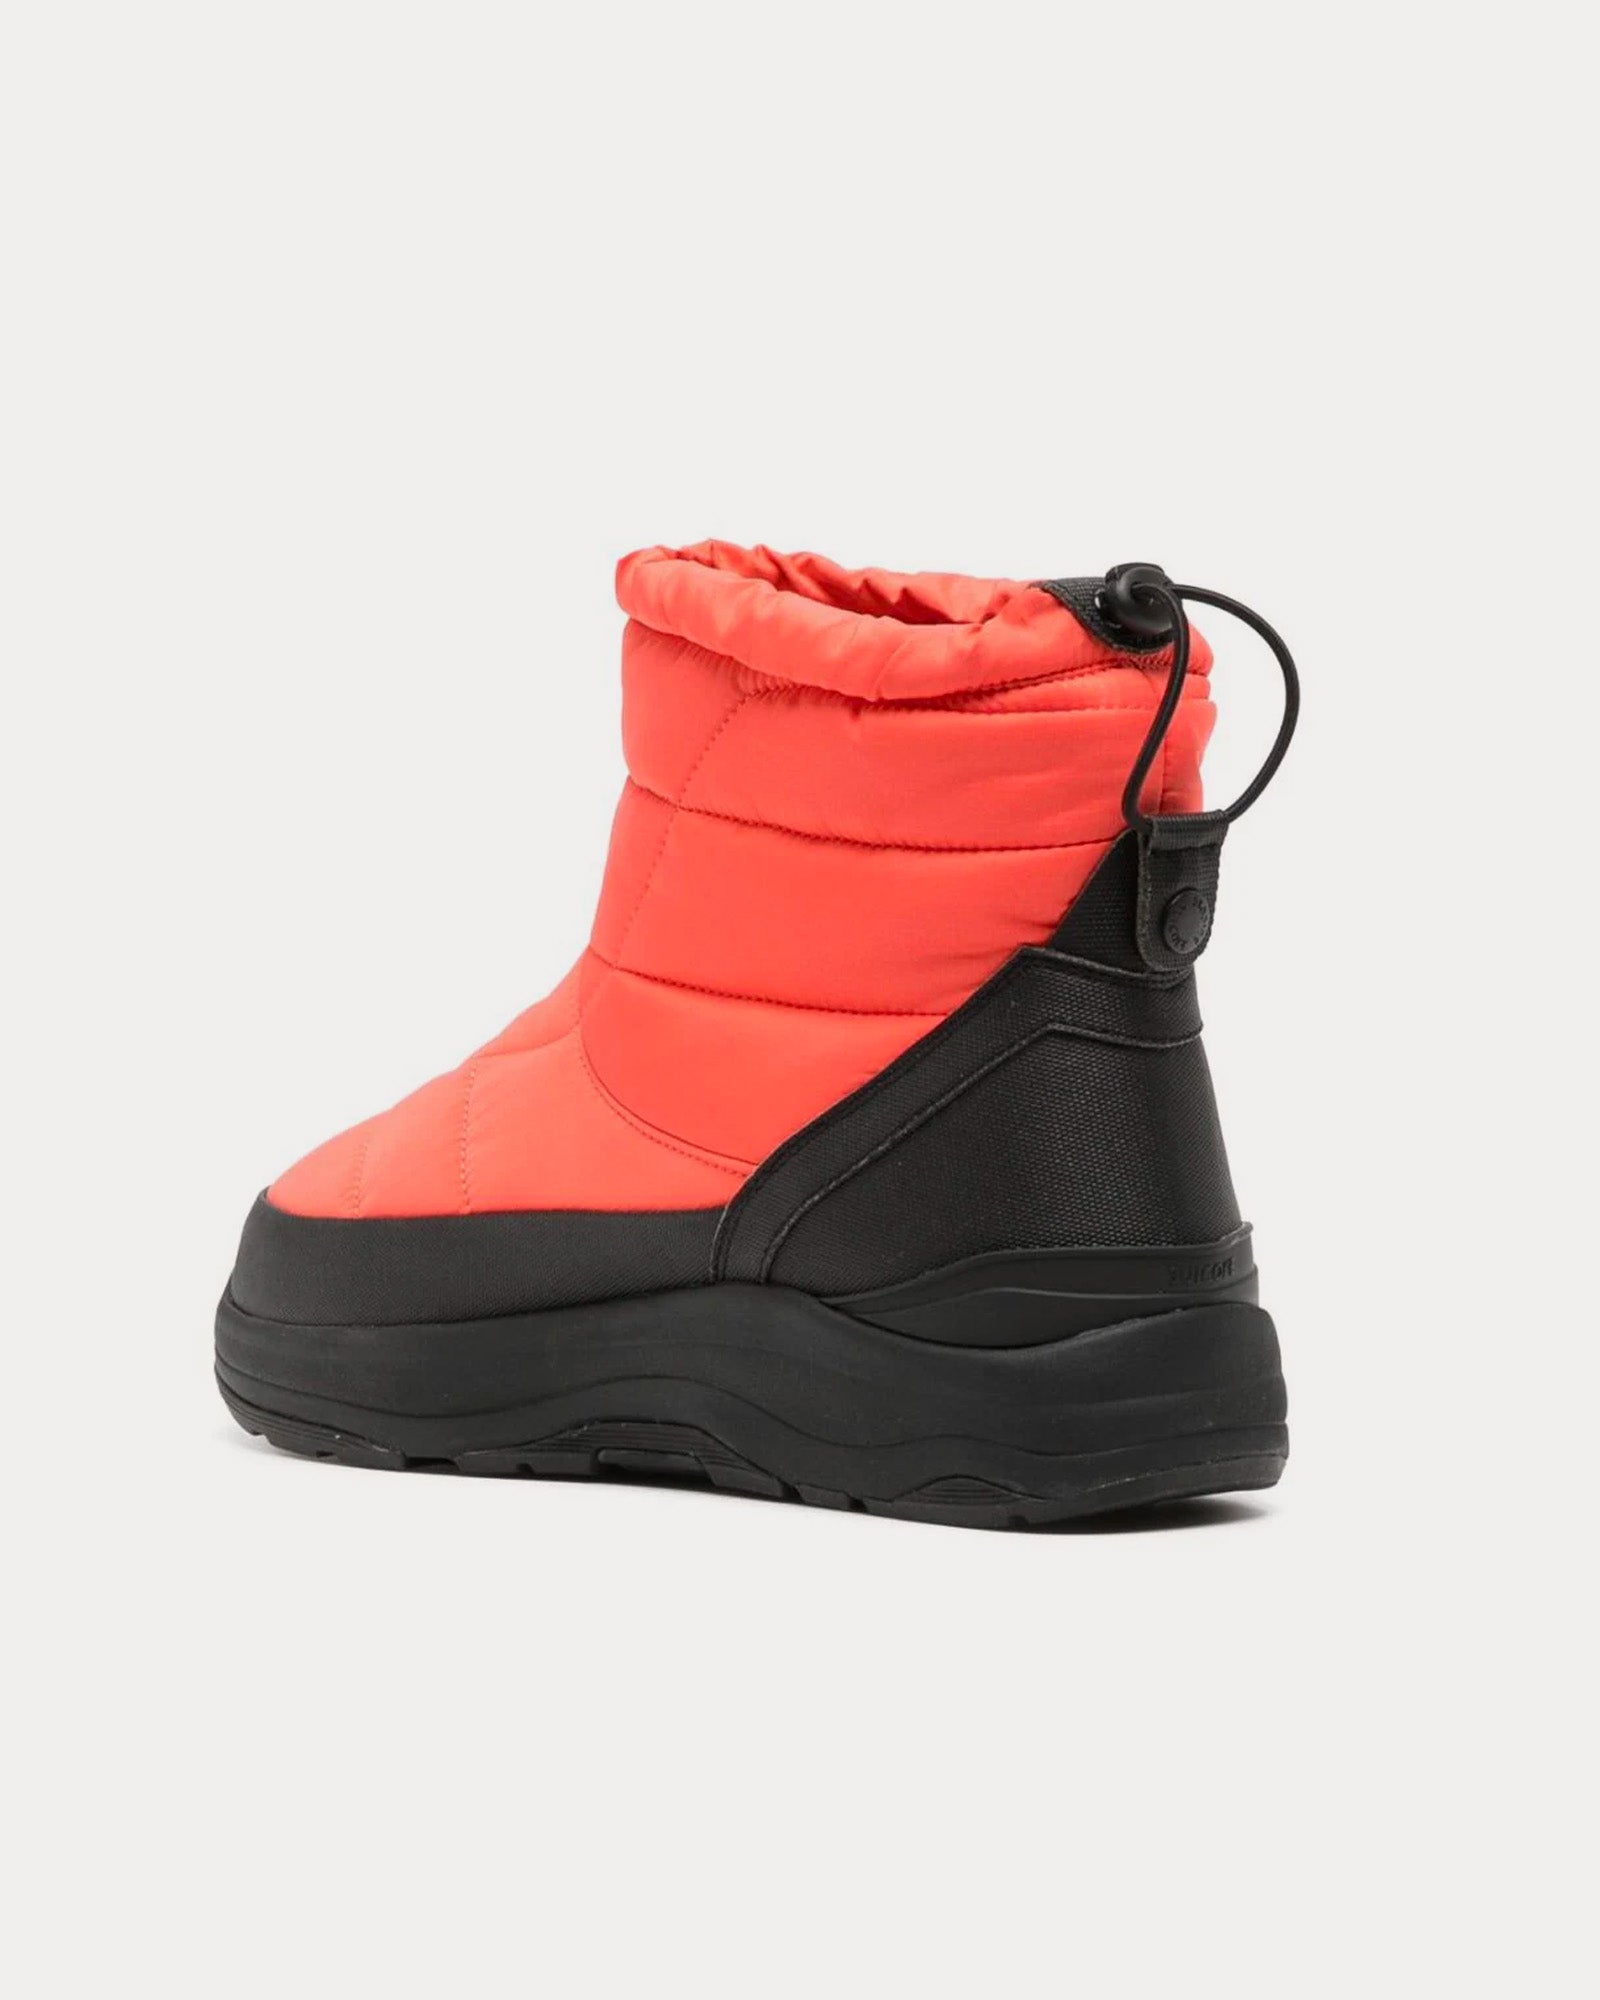 Suicoke - BOWER-evab Bright Red / Black Snow Boots